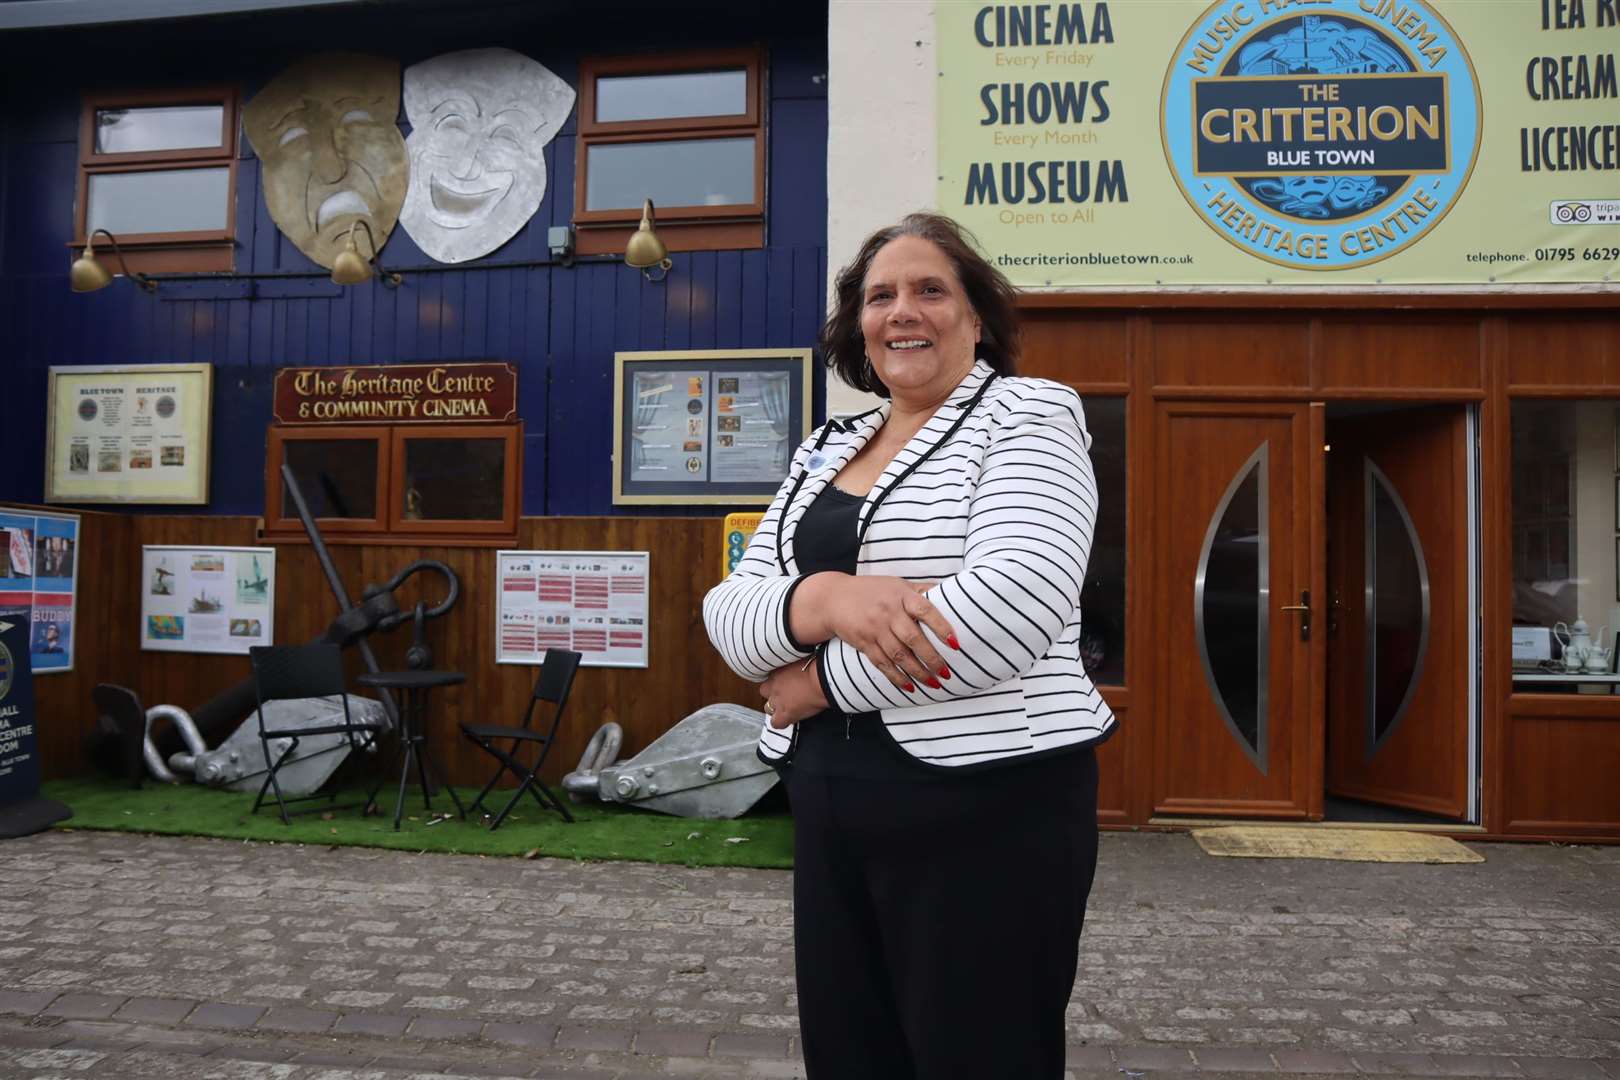 Jenny Hurkett outside the new-look Criterion Theatre and Blue Town Heritage Centre, Sheppey